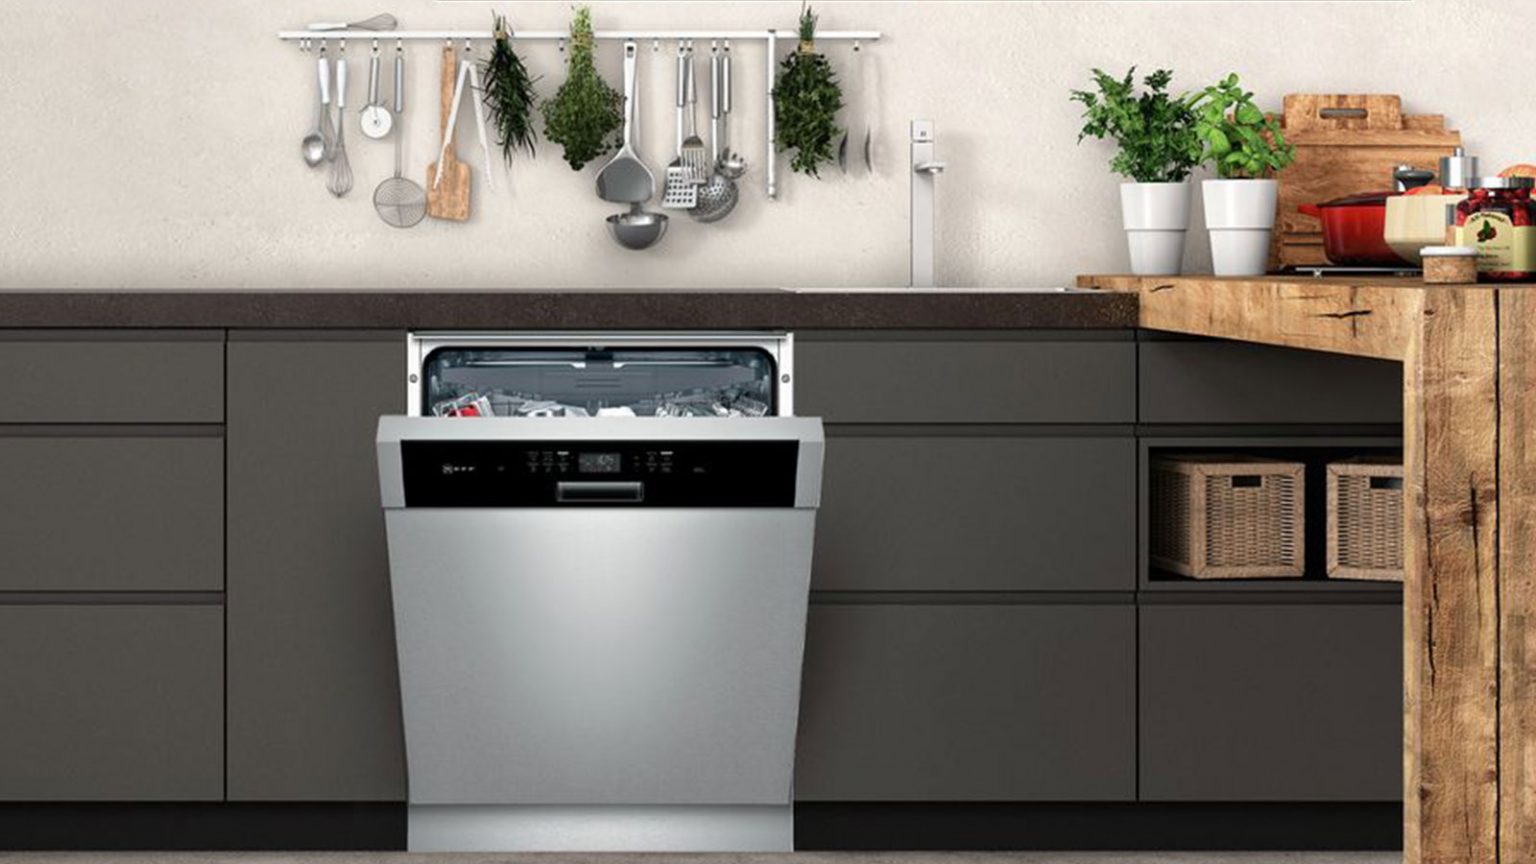 Dishwashers - Large Appliances from a great selection at Home &amp; Kitchen Store.